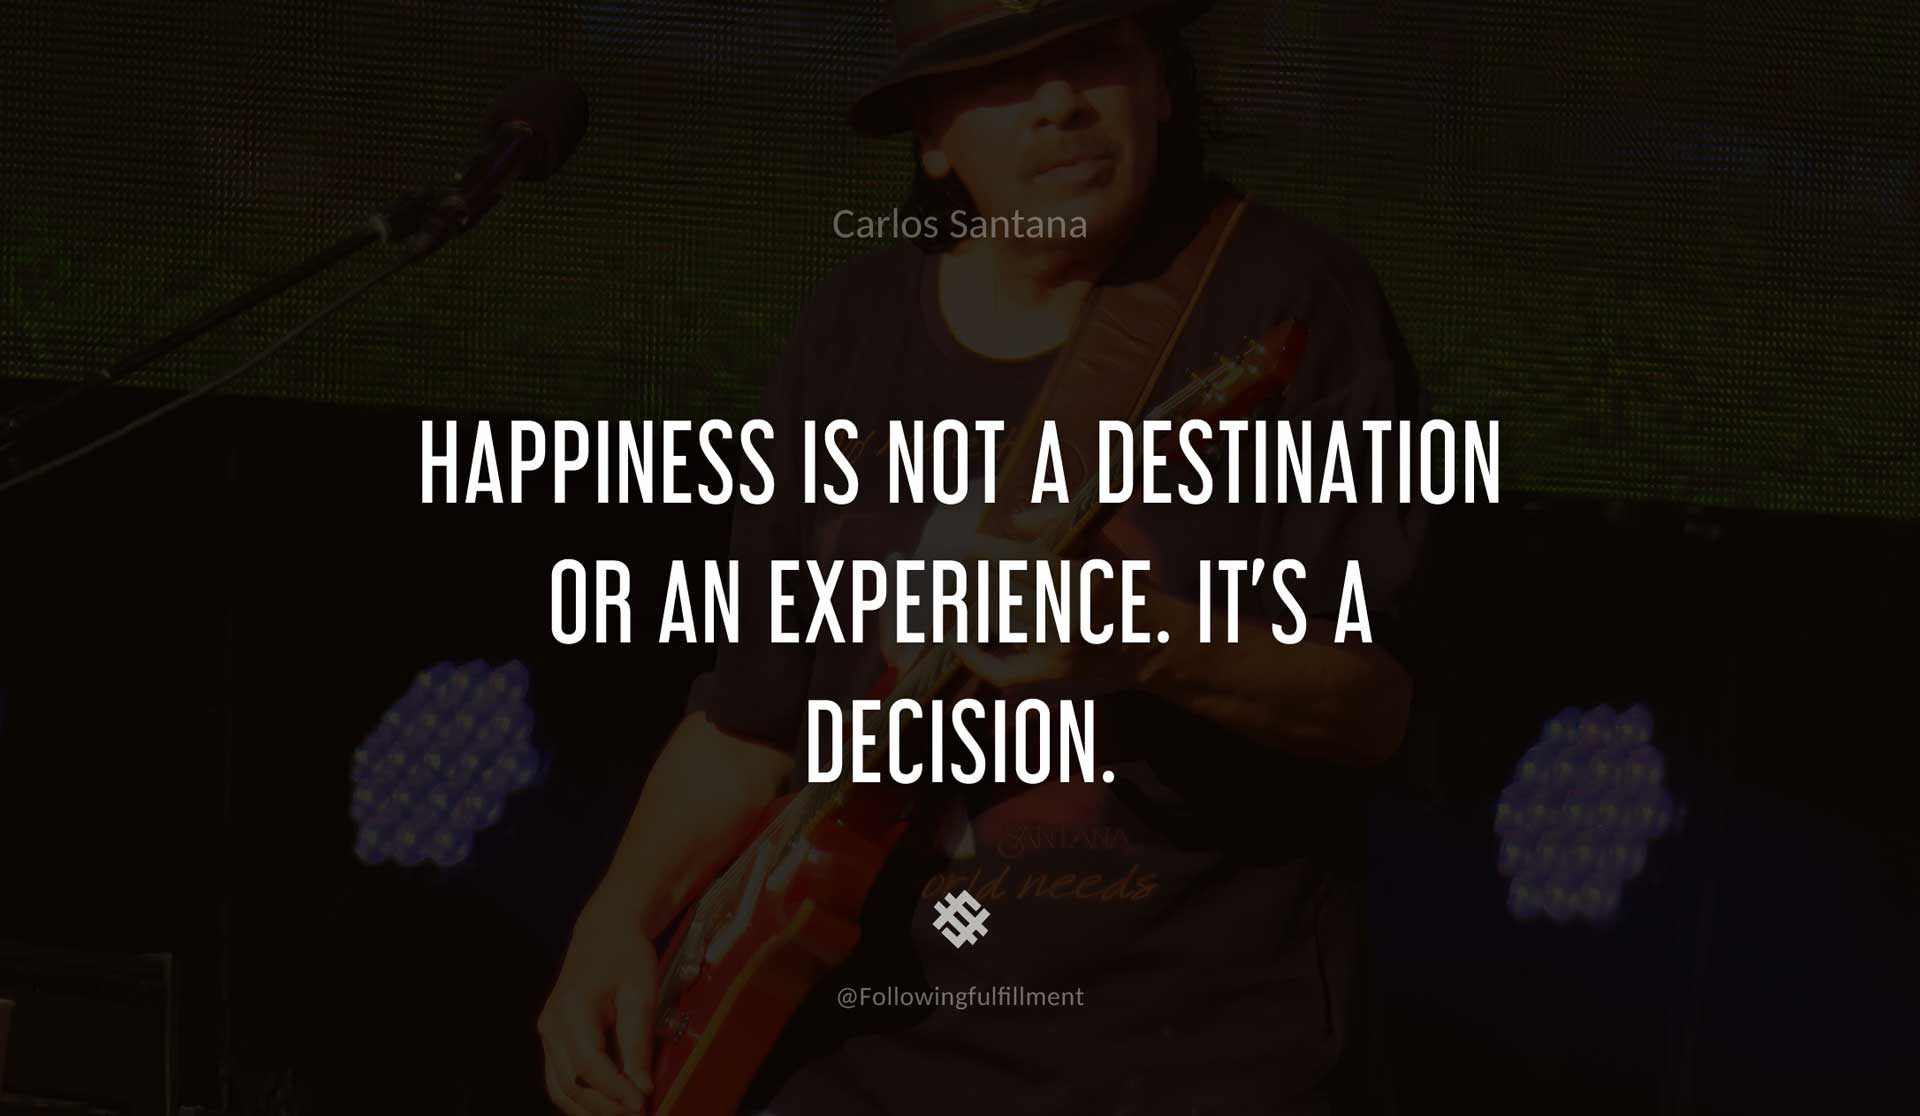 Happiness-is-not-a-destination-or-an-experience.-It's-a-decision.--CARLOS-SANTANA-Quote.jpg